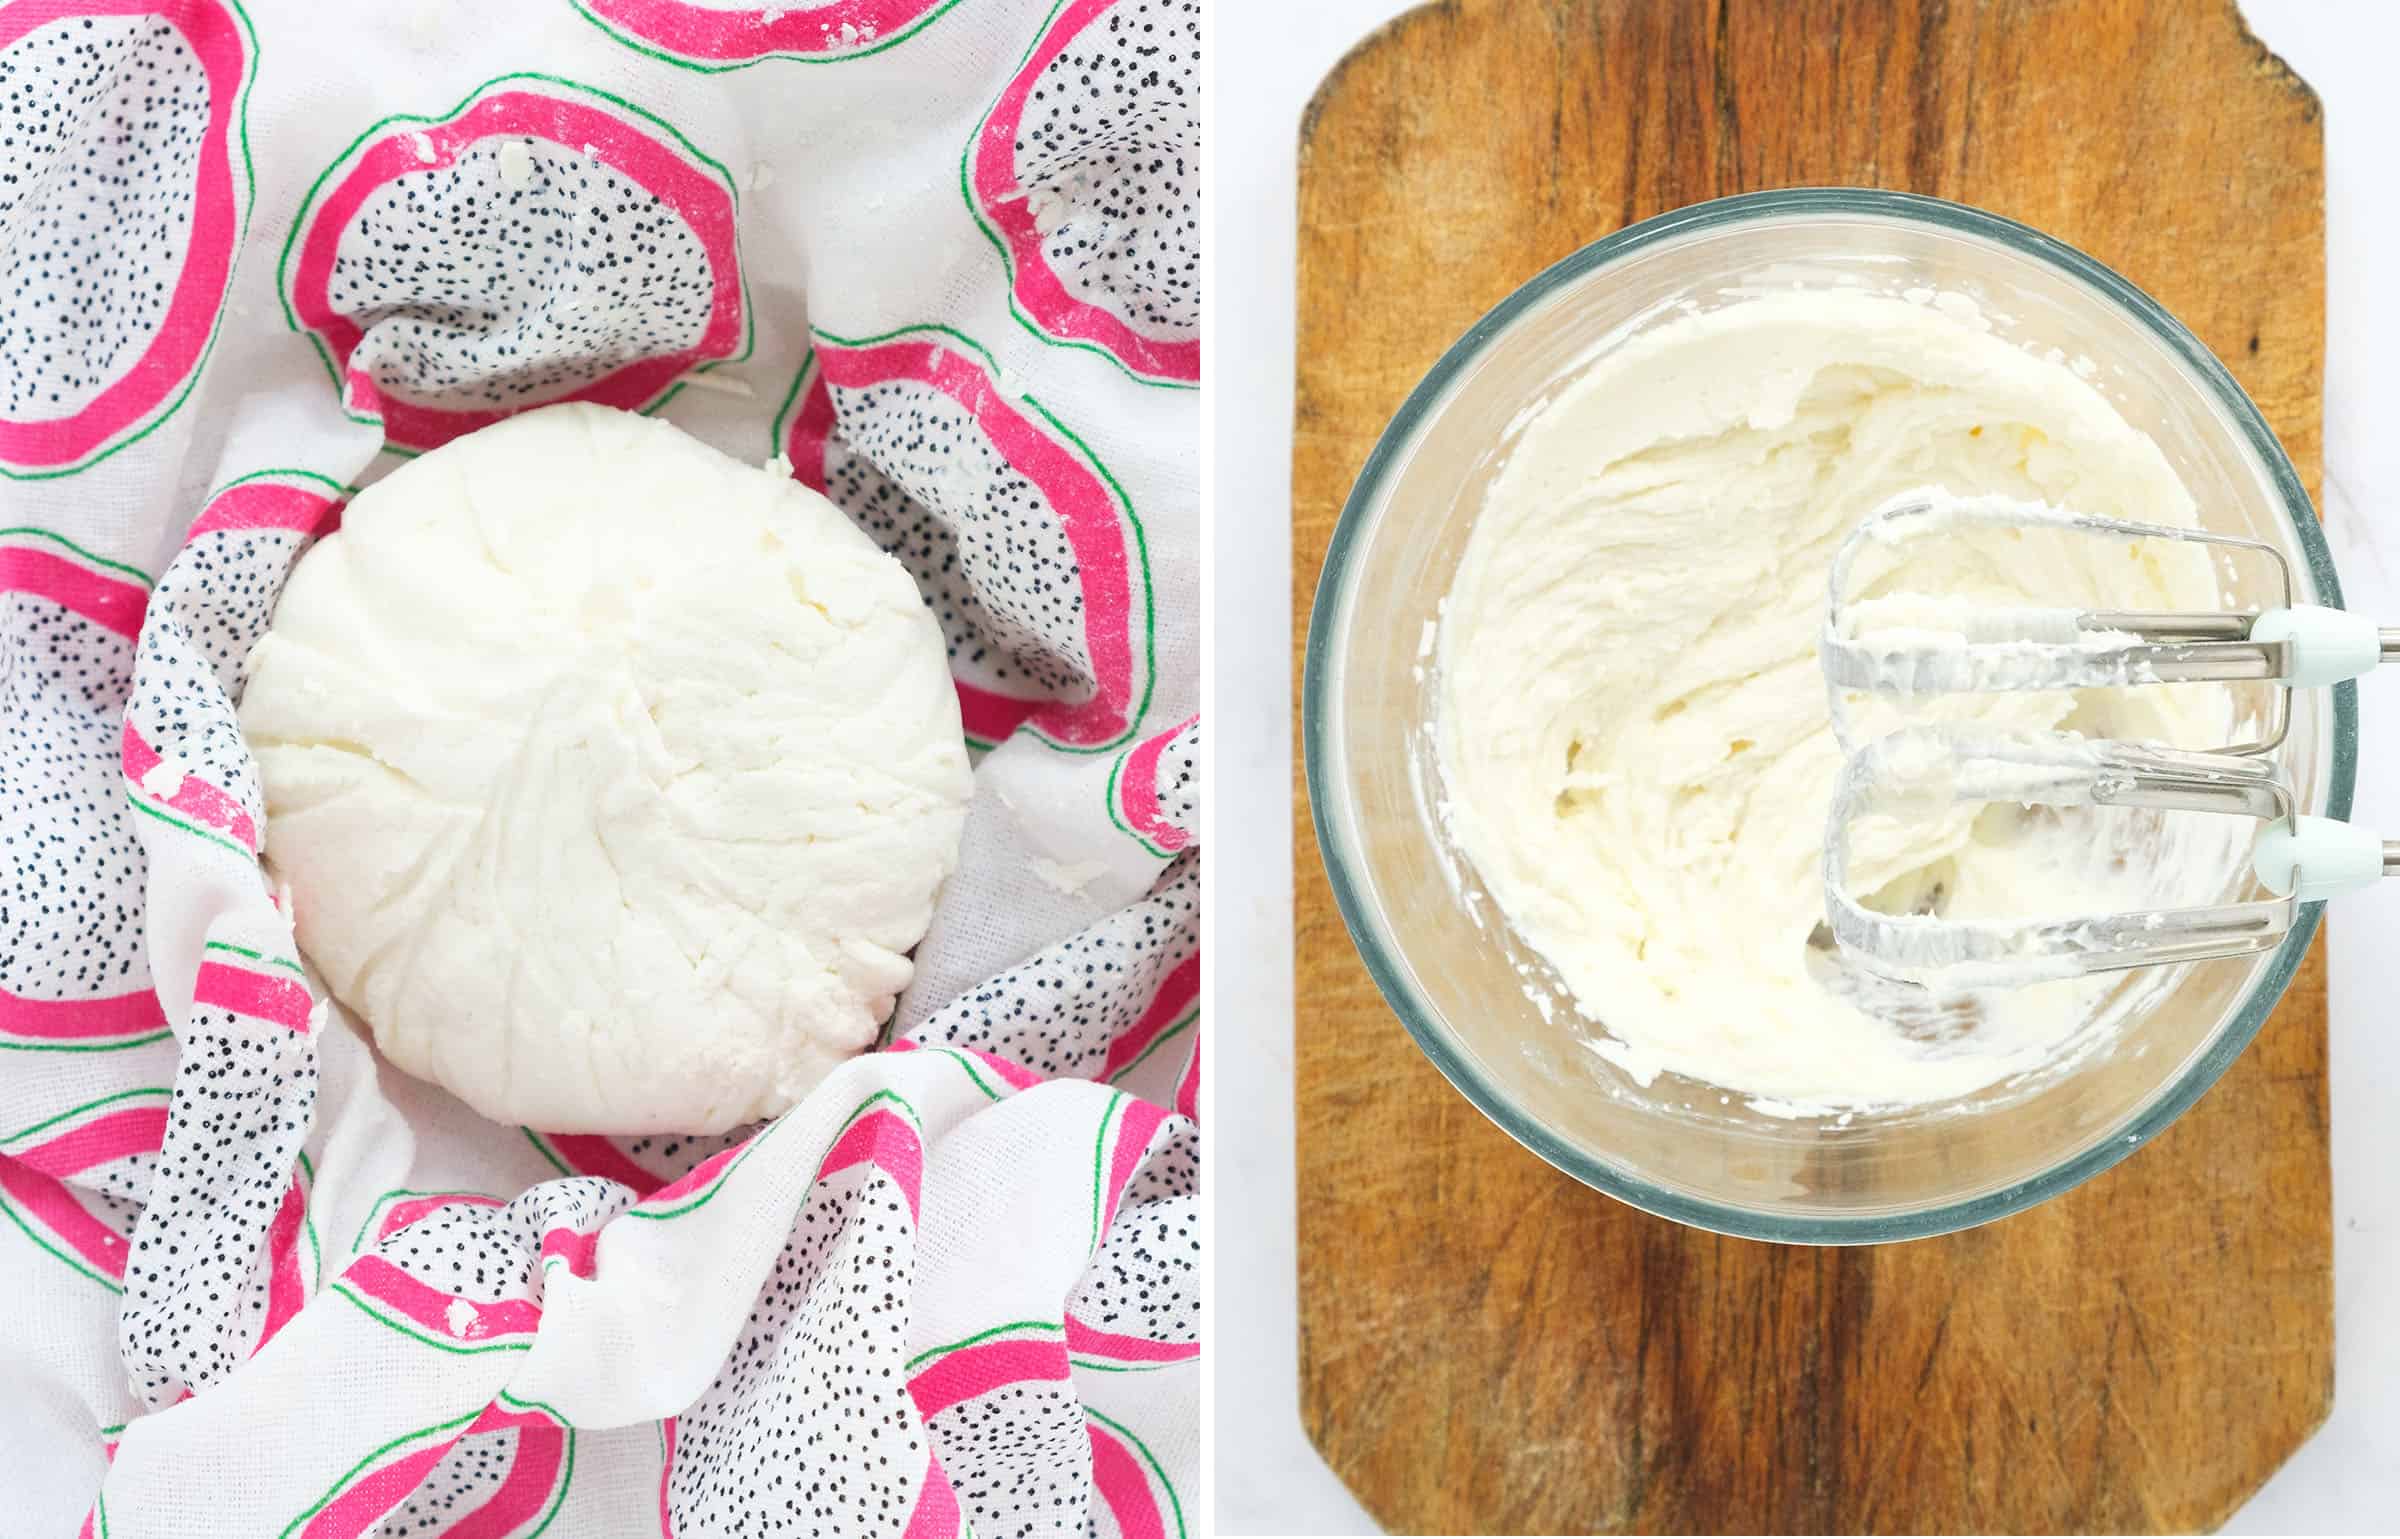 Two images showing some ricotta on a tea towel and a glass bowl with whipped ricotta.